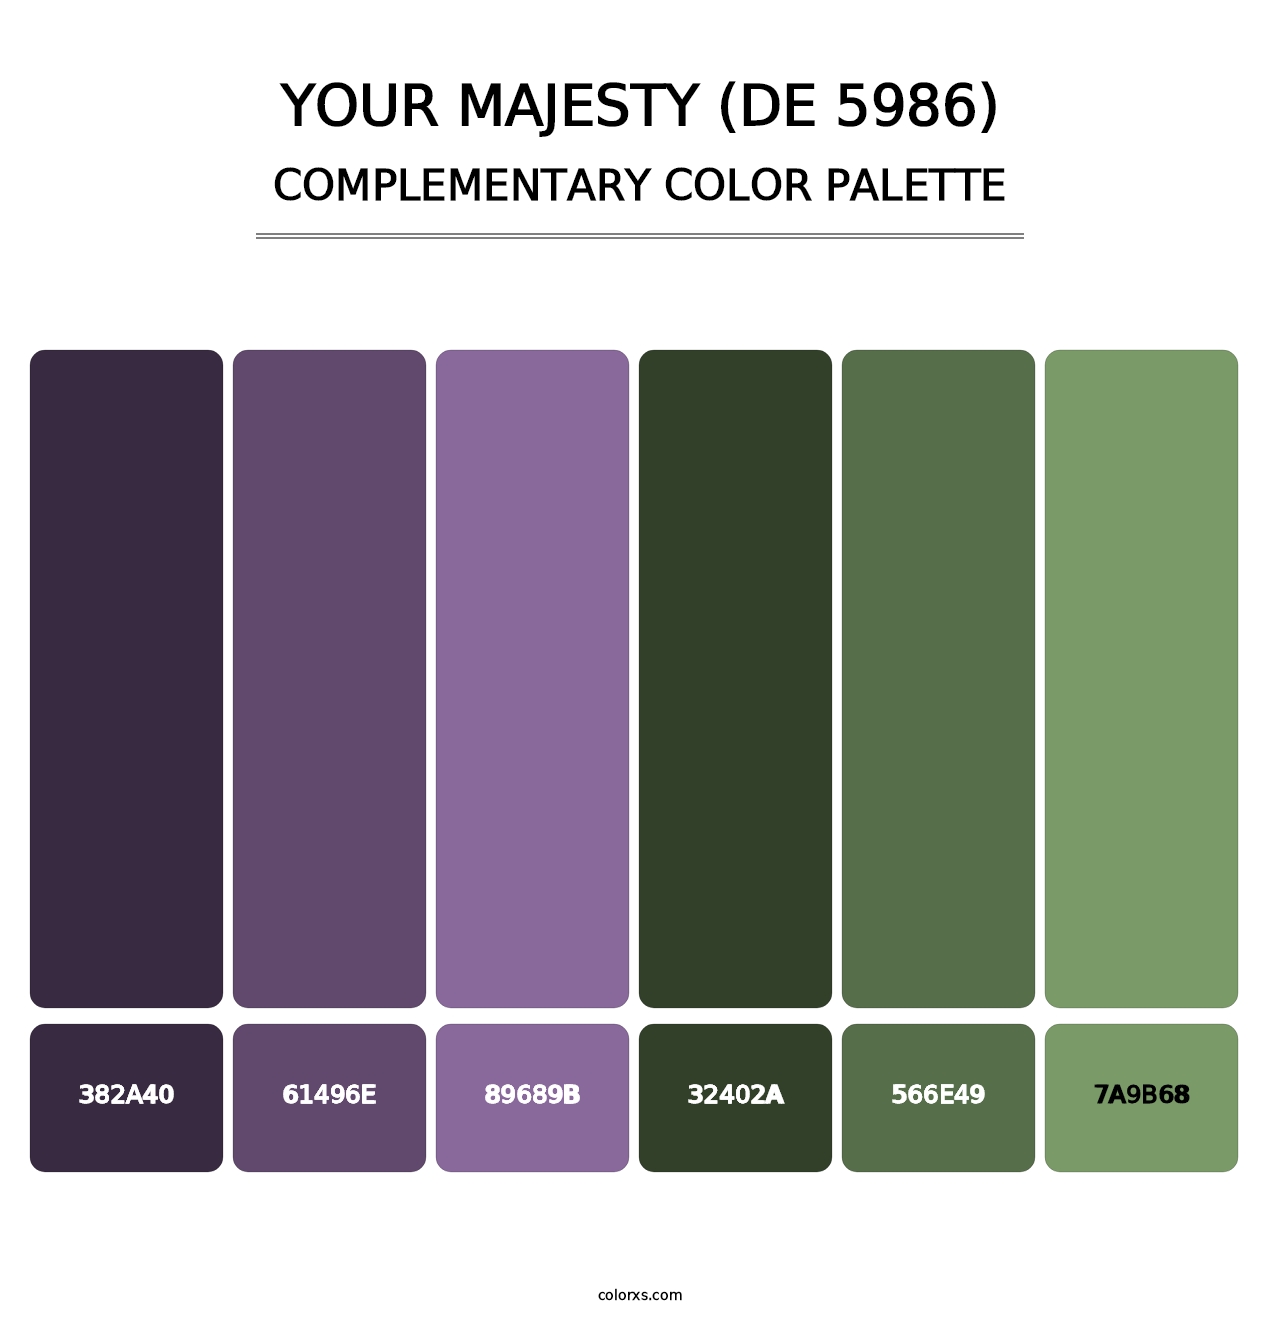 Your Majesty (DE 5986) - Complementary Color Palette